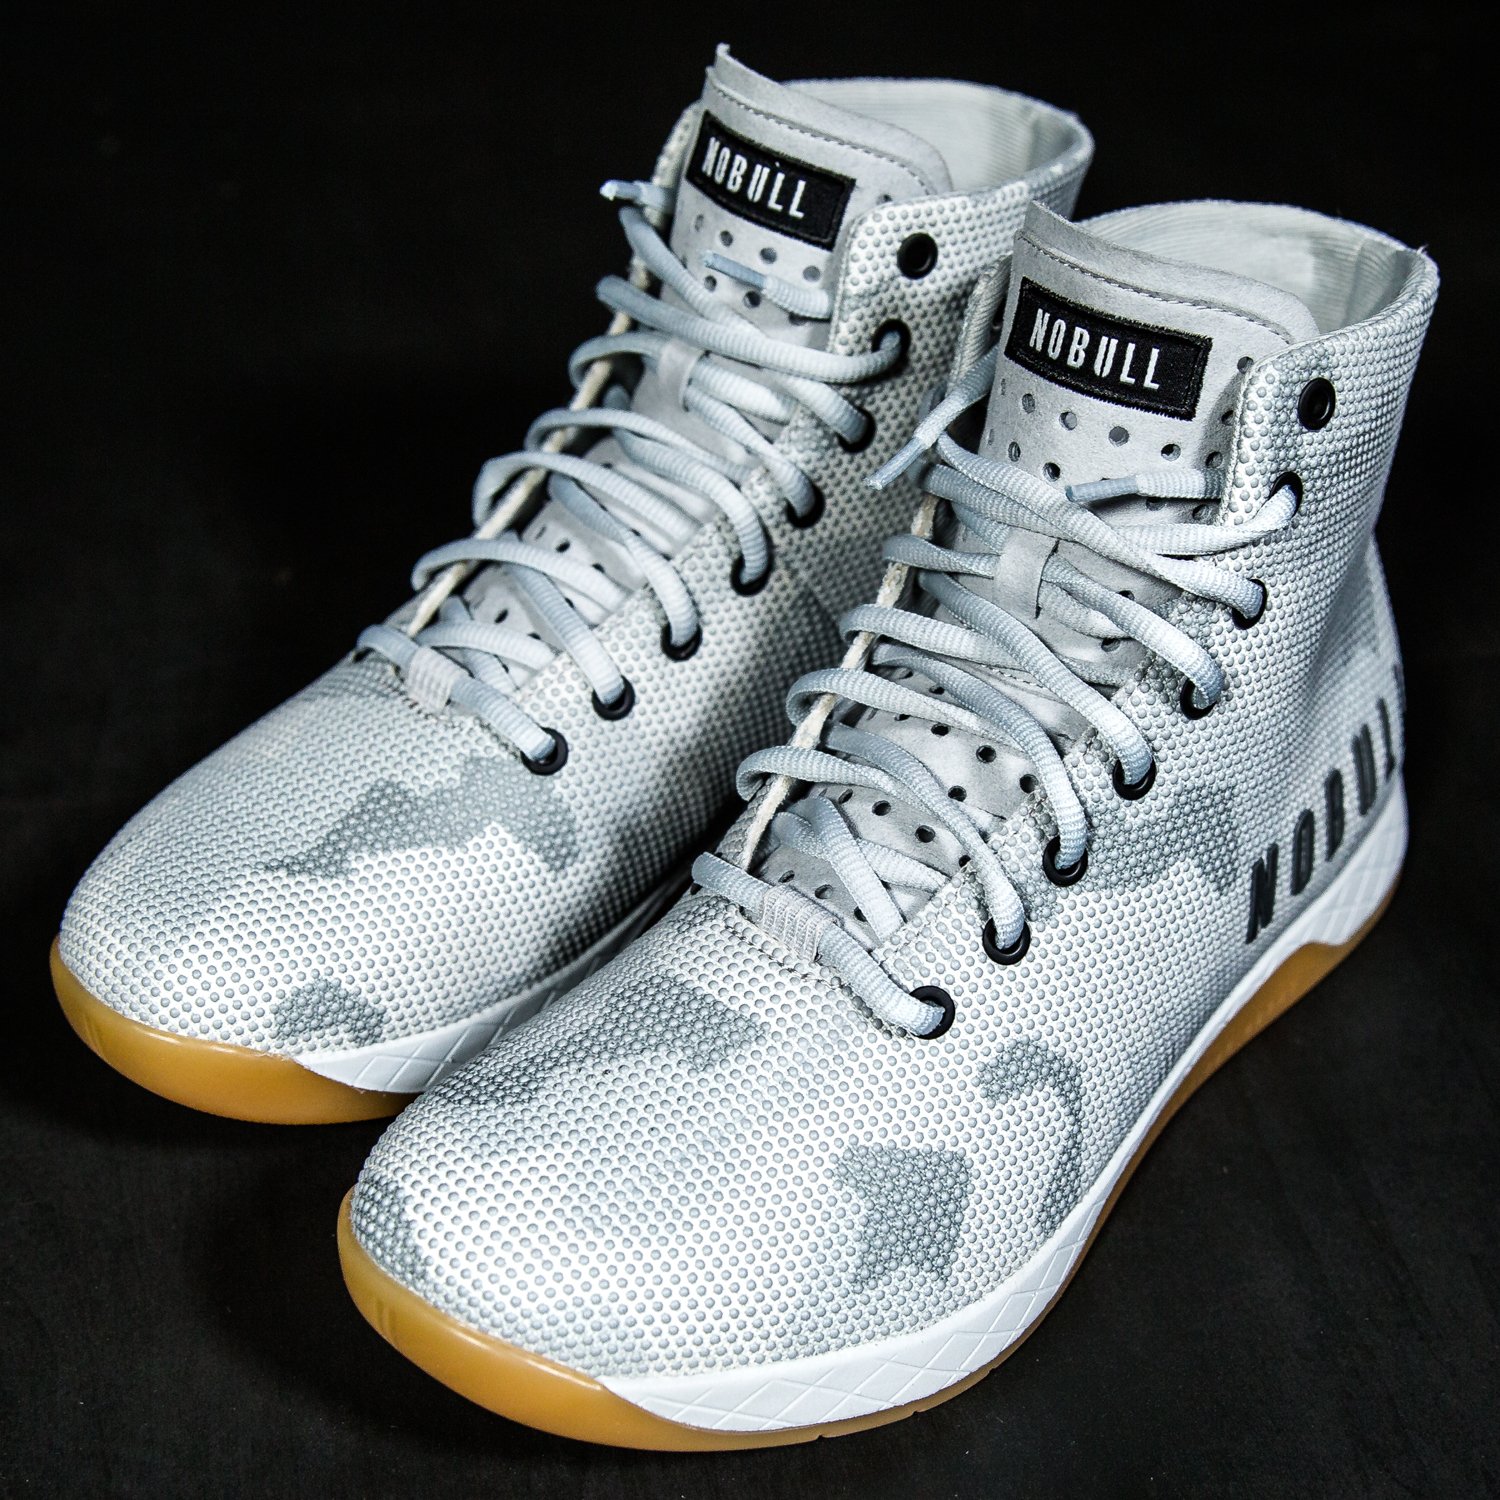 NOBULL - Introducing the High-Top White Trainer, the